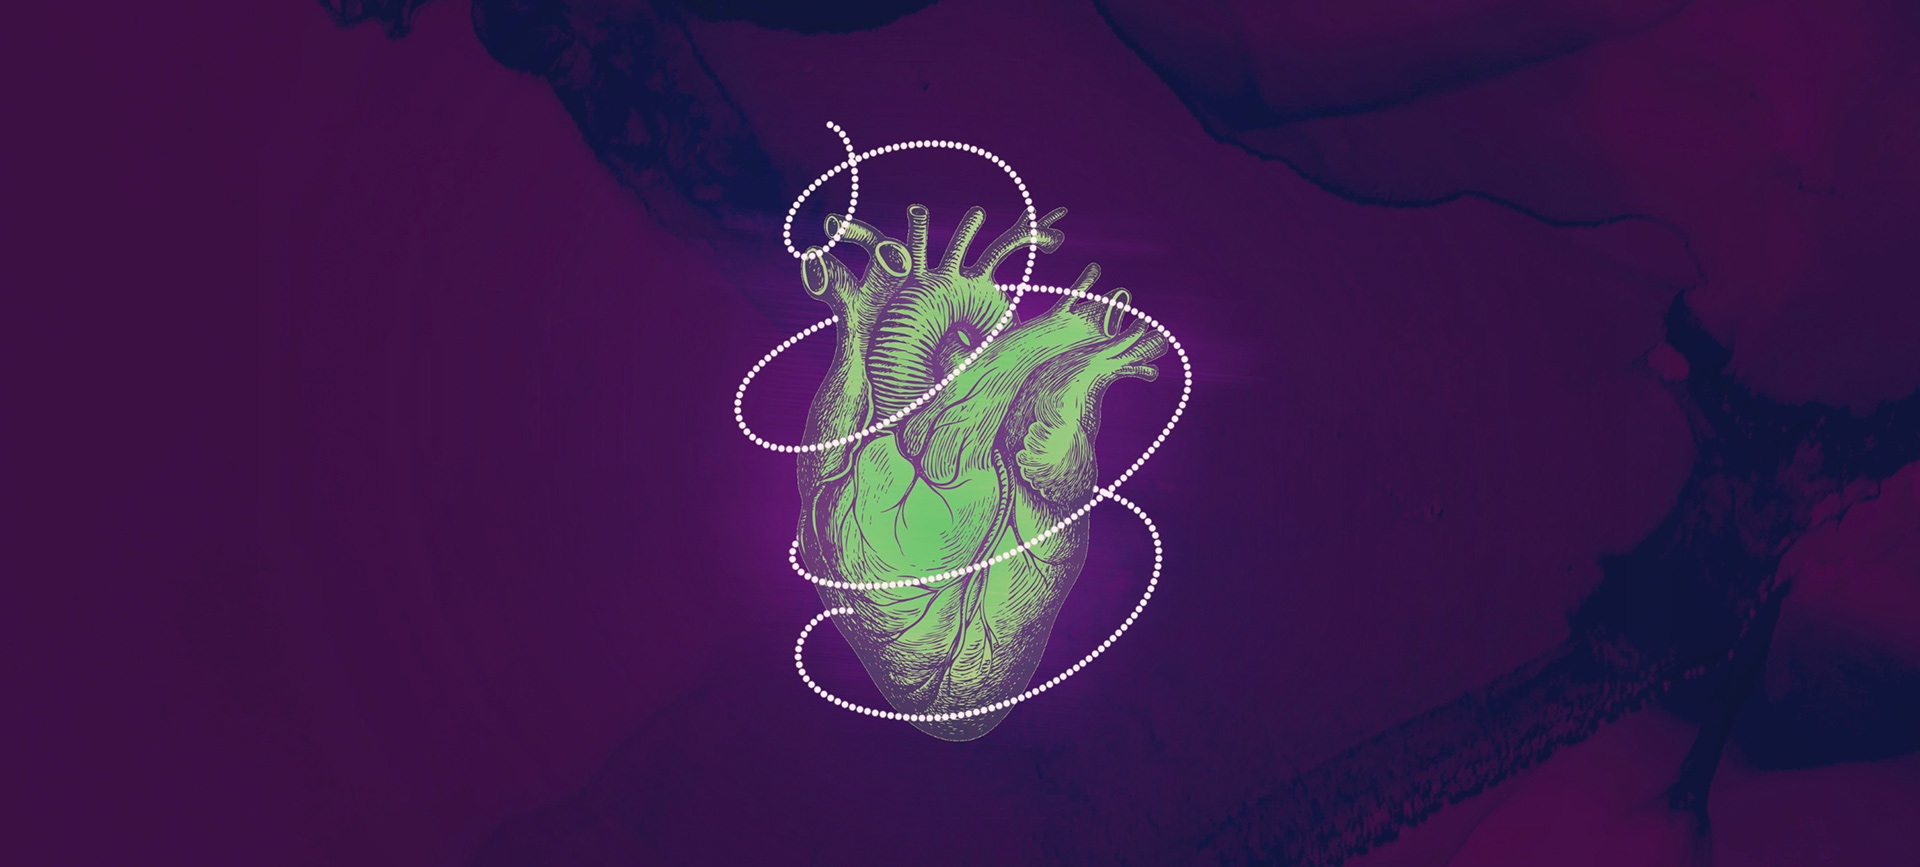 A green and purple heart sits against a purple background with a ribbon of white dots swirling around it.